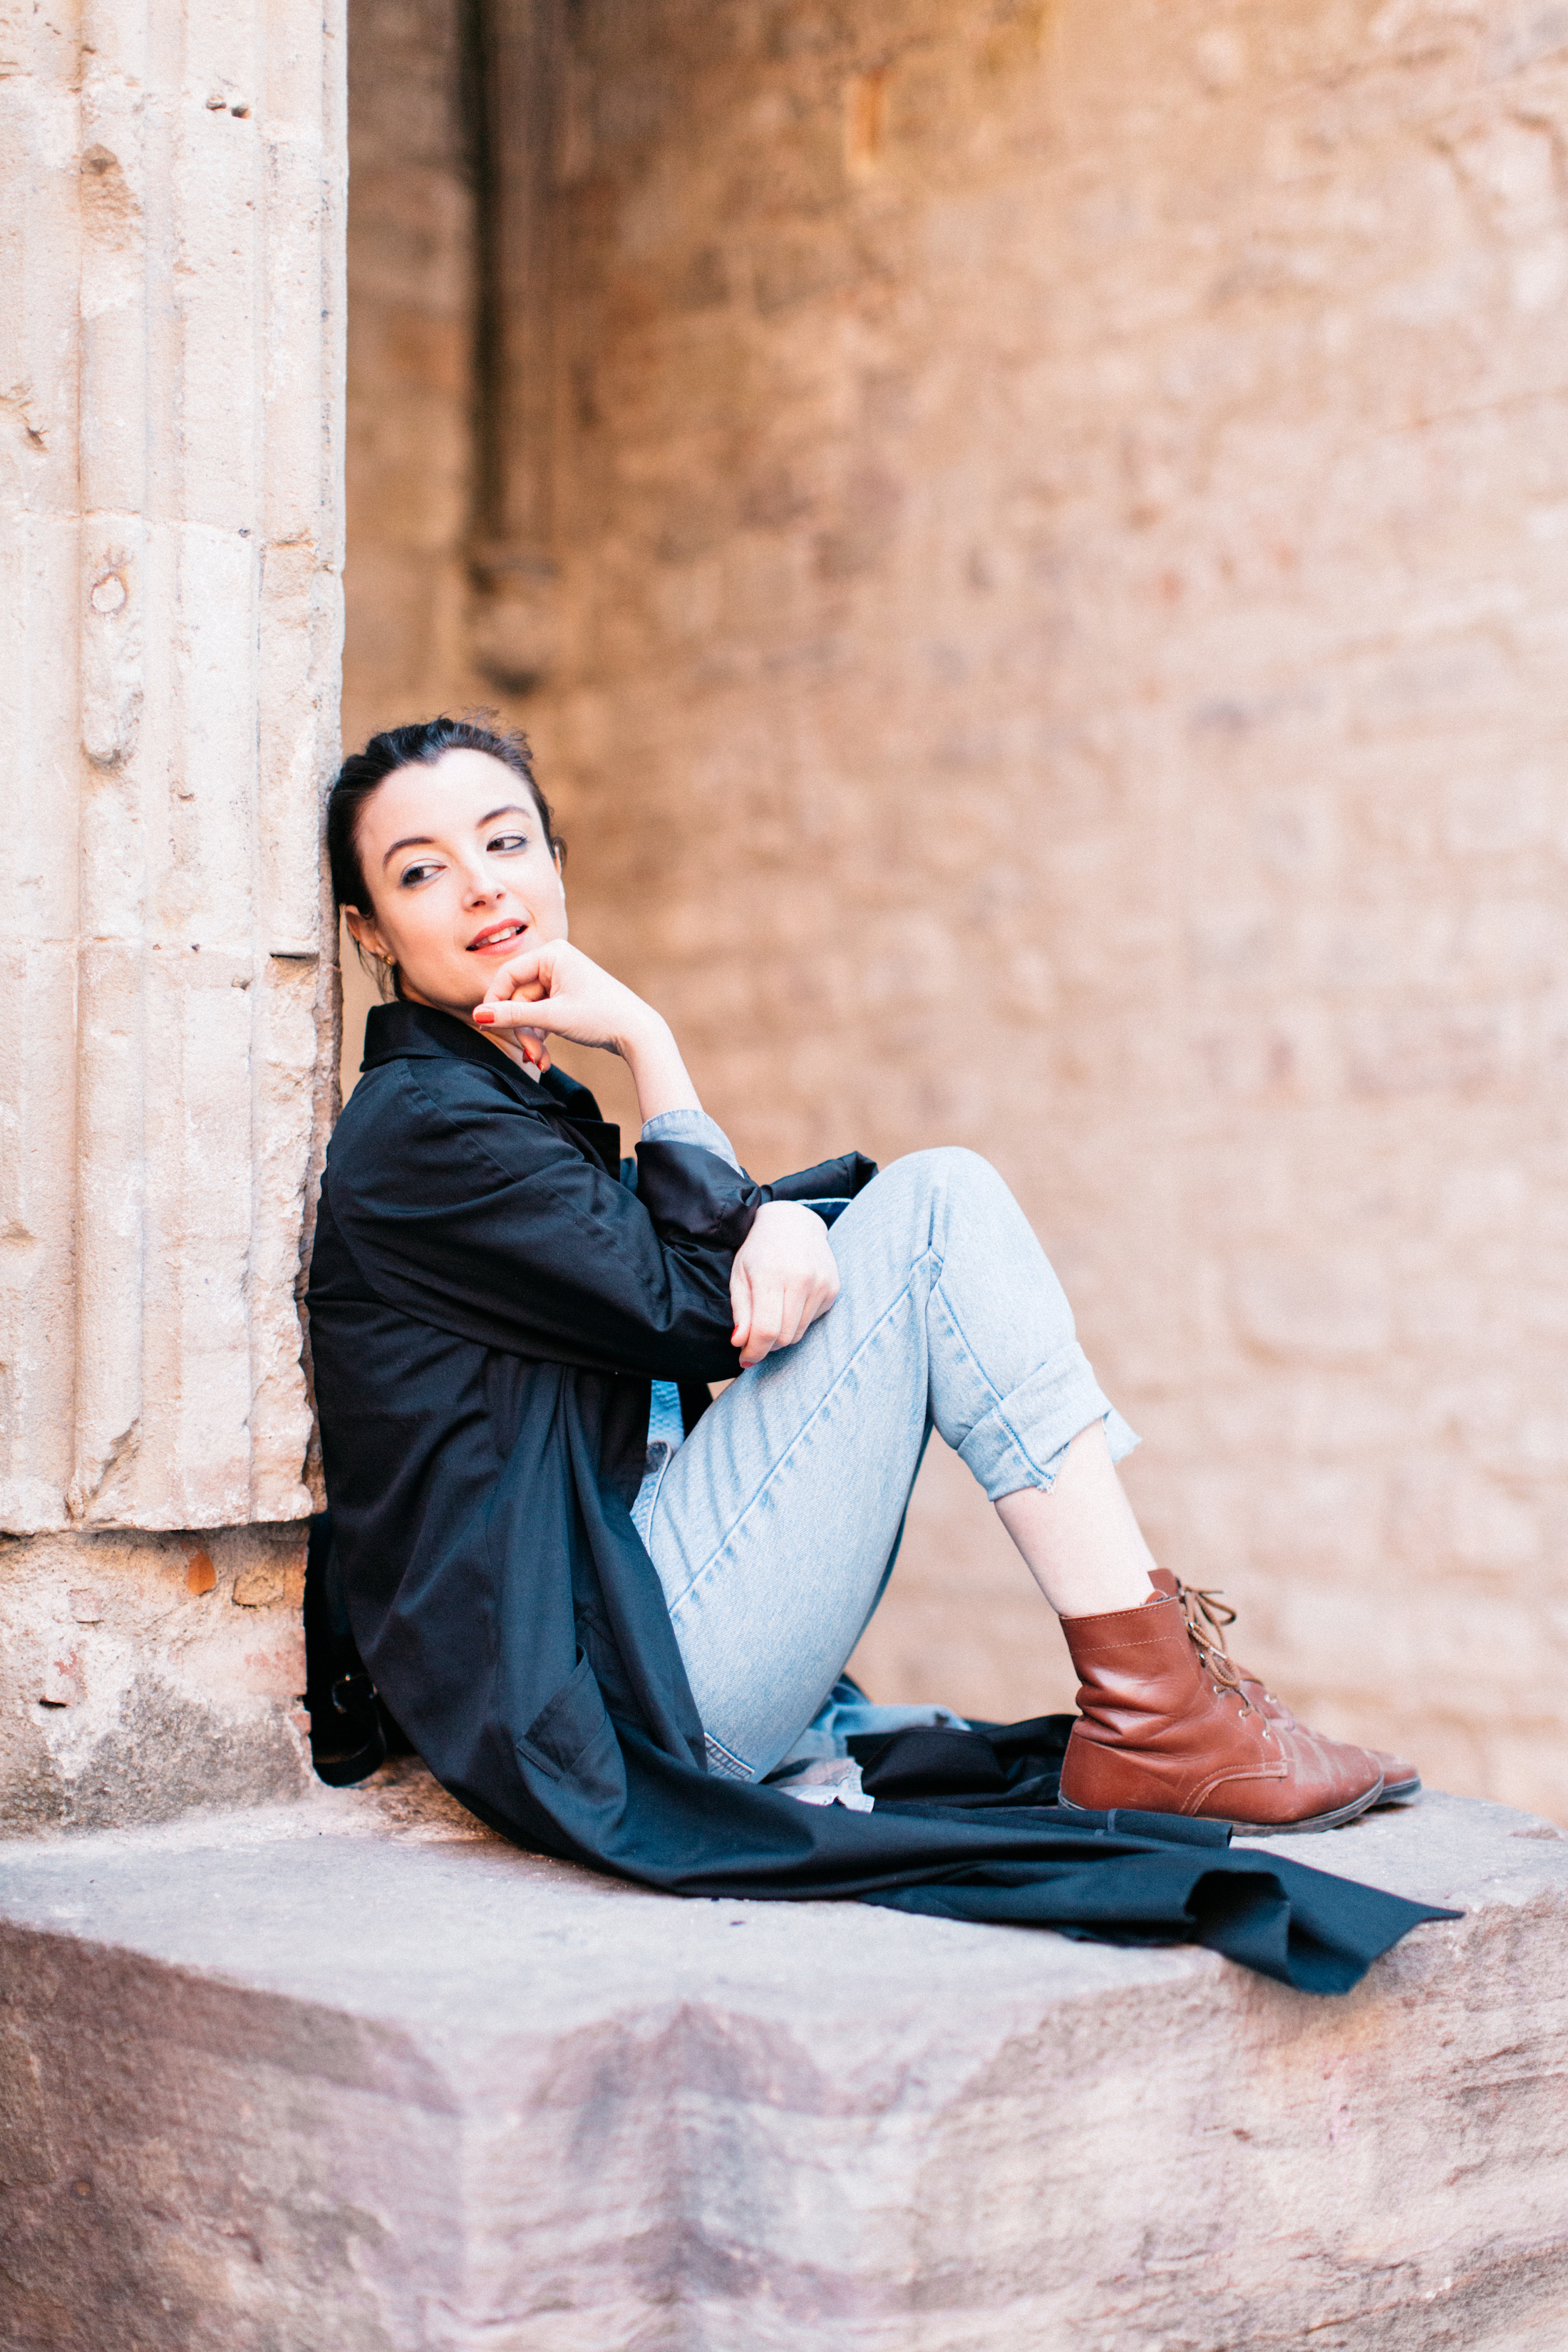  Martina from Barcelona generously acted as our model during the photowalk. Flytographer:  Natalie  